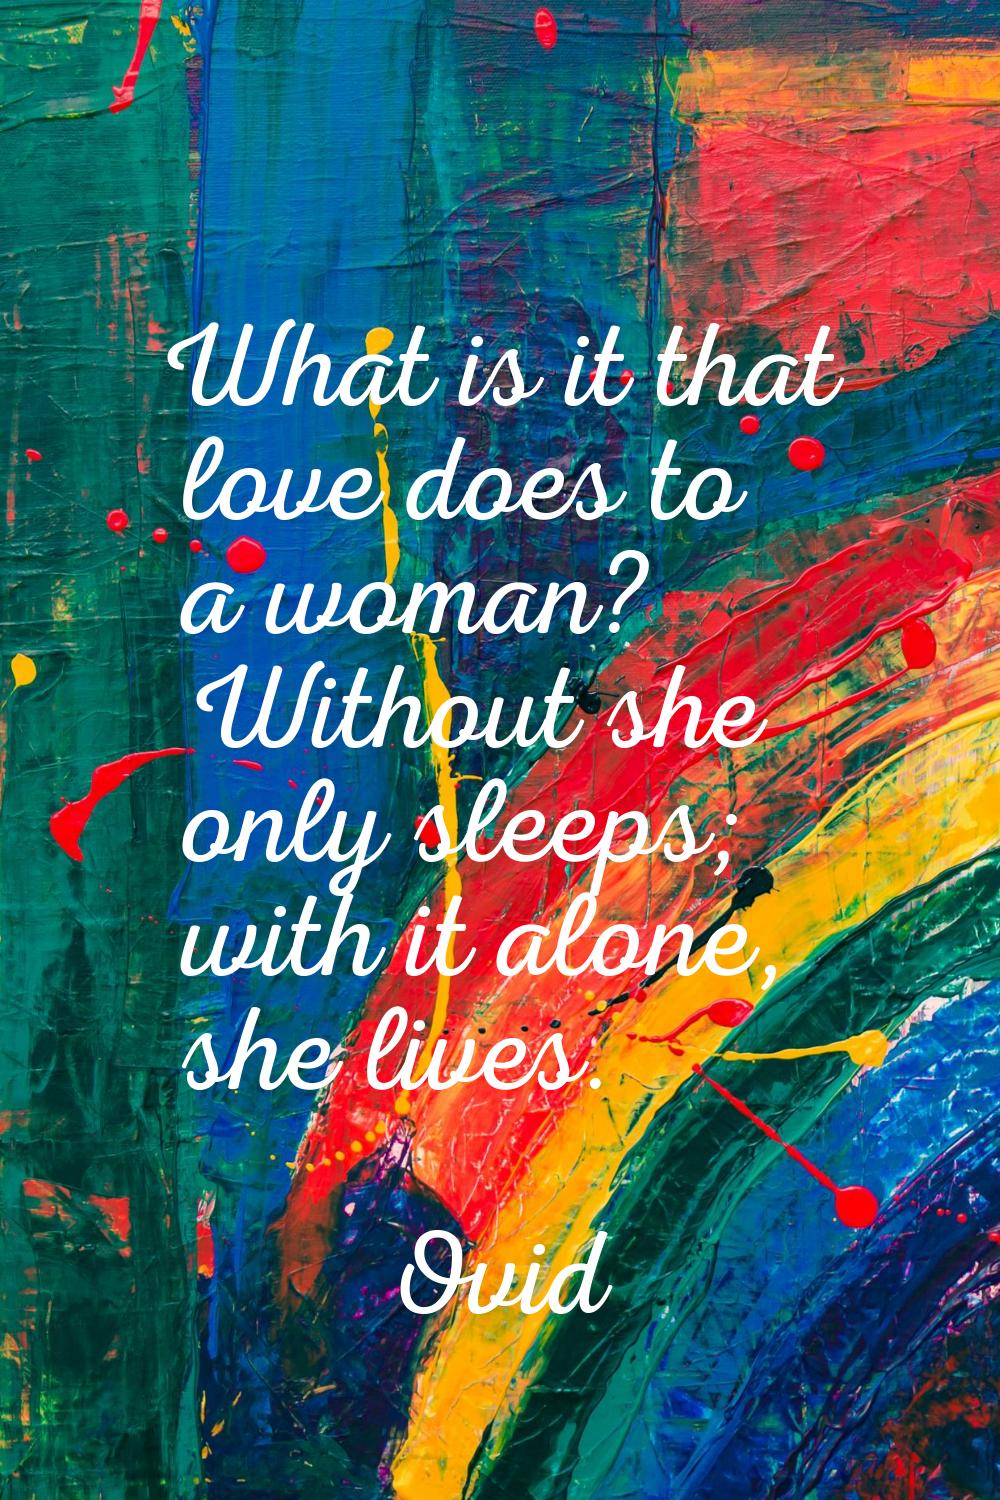 What is it that love does to a woman? Without she only sleeps; with it alone, she lives.